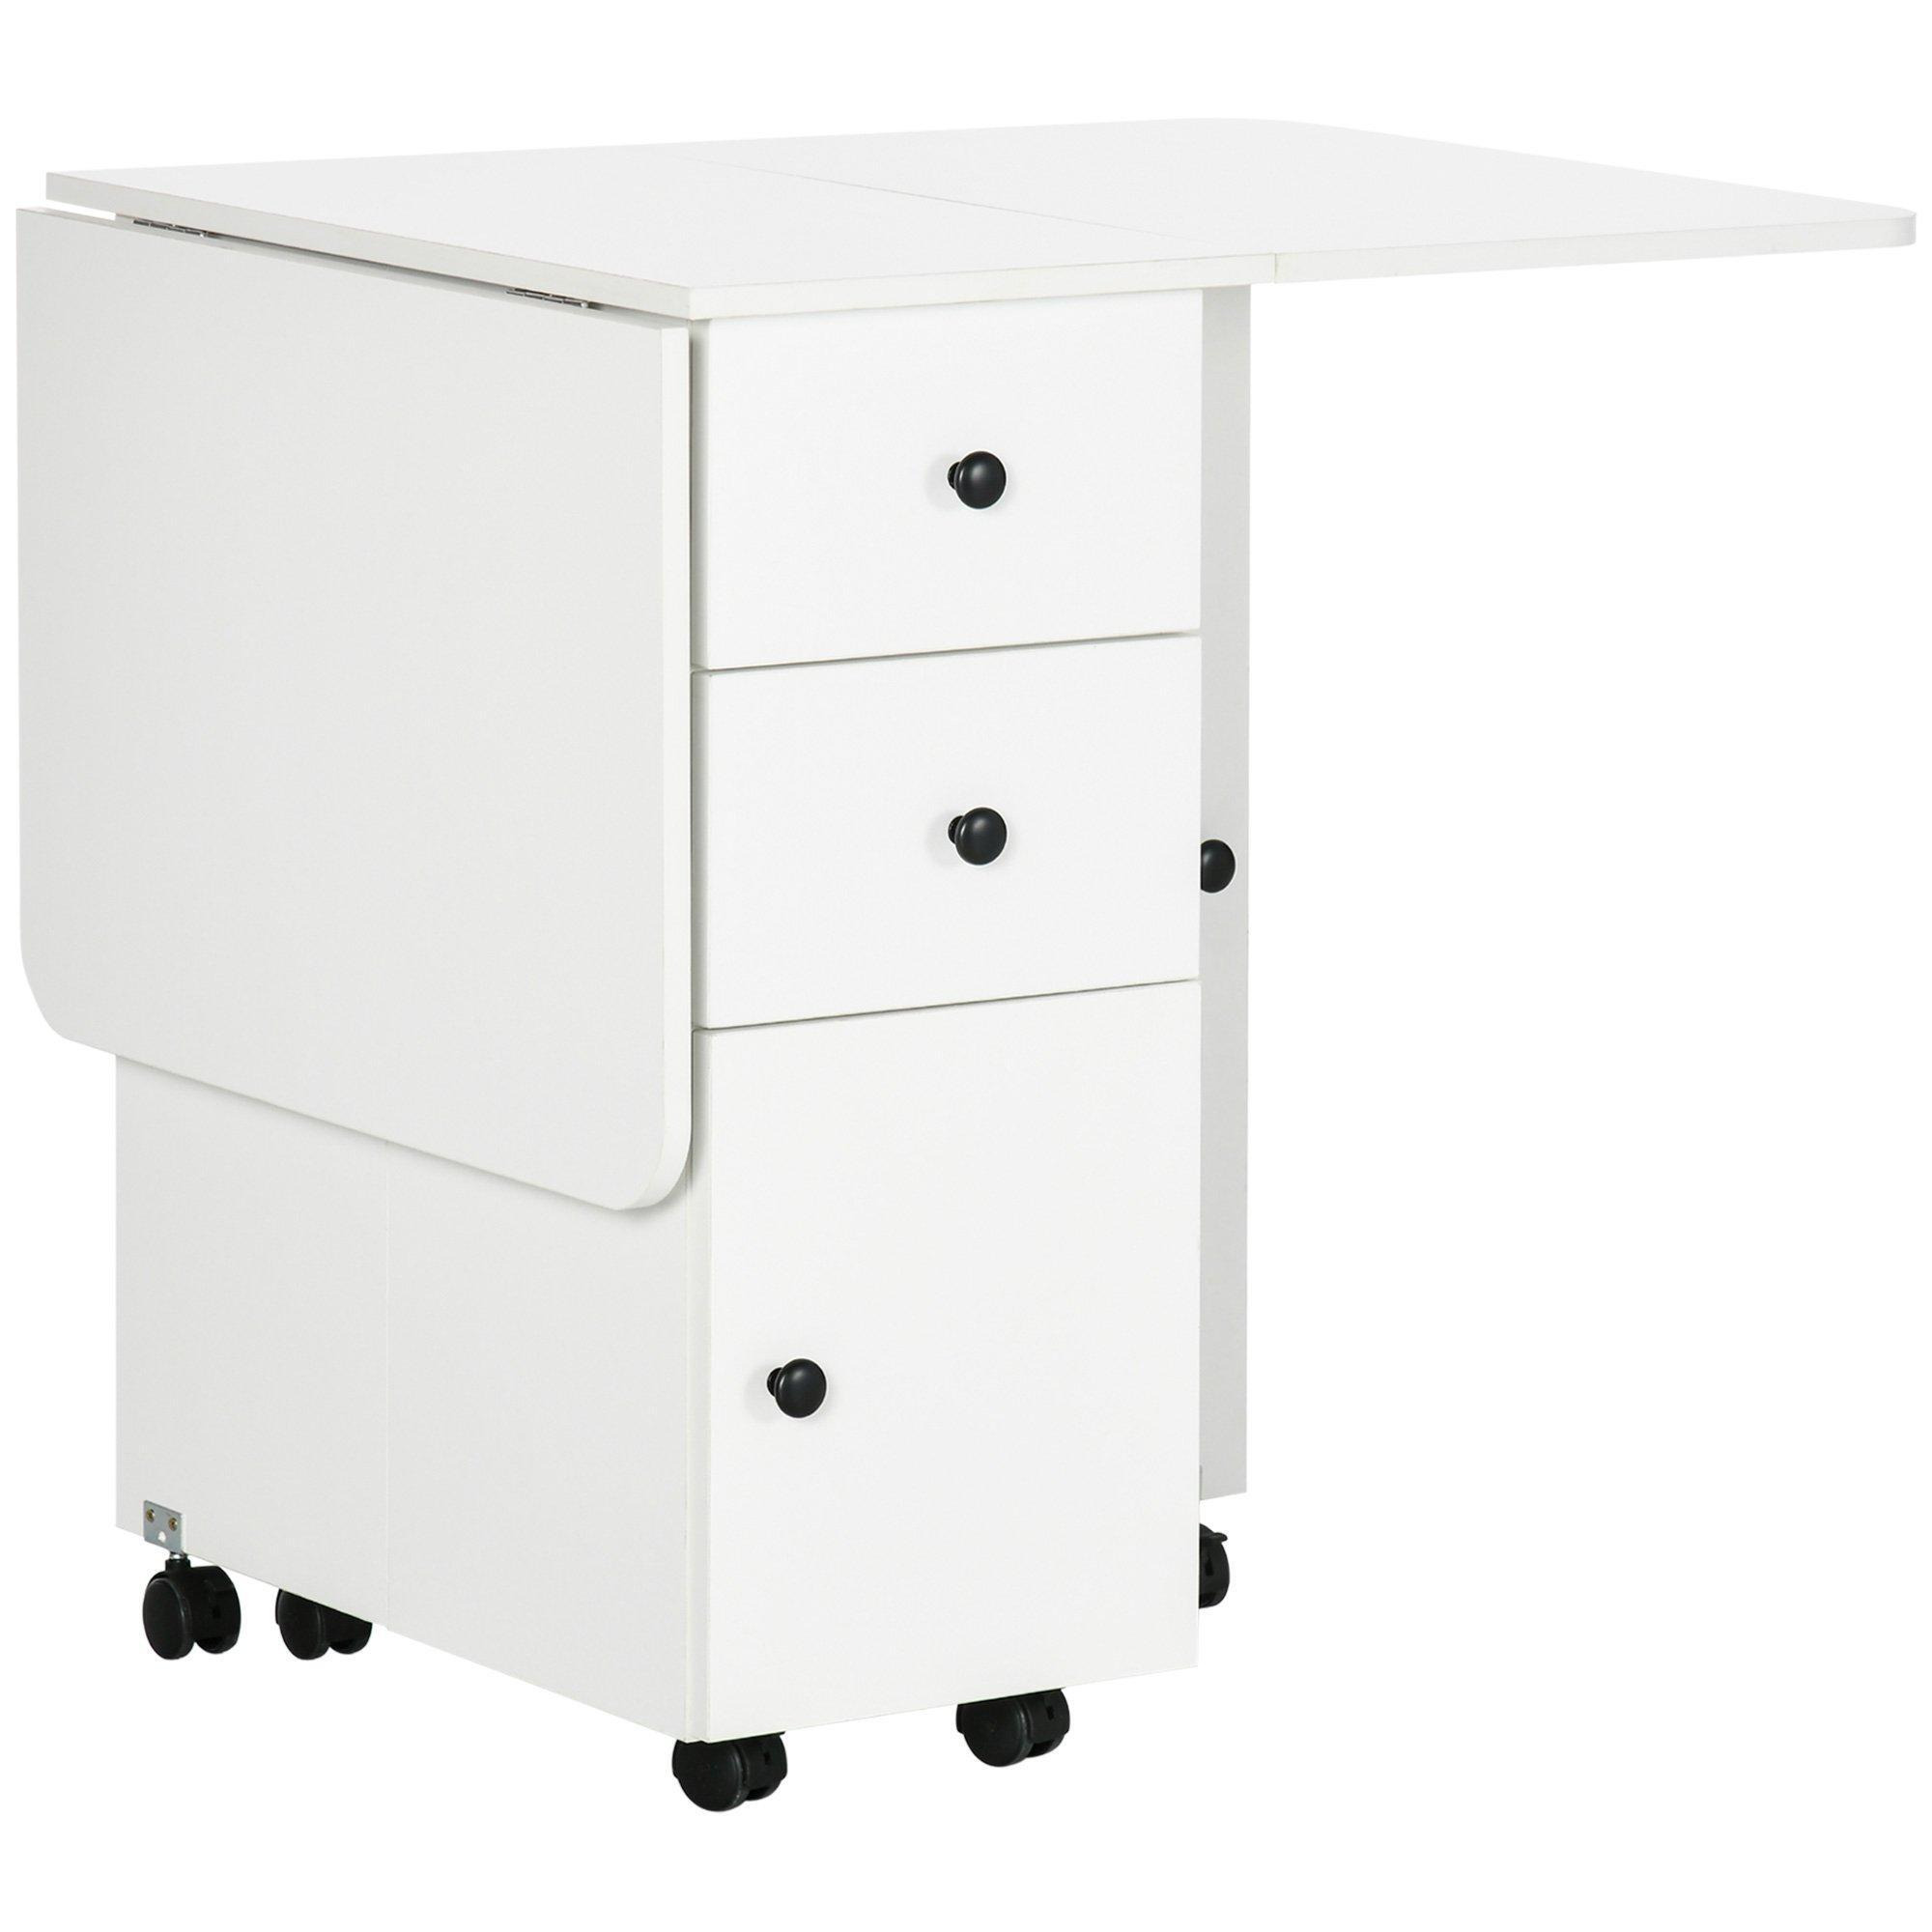 Folding Dining Table Rolling Kitchen Table With Storage Drawers - image 1